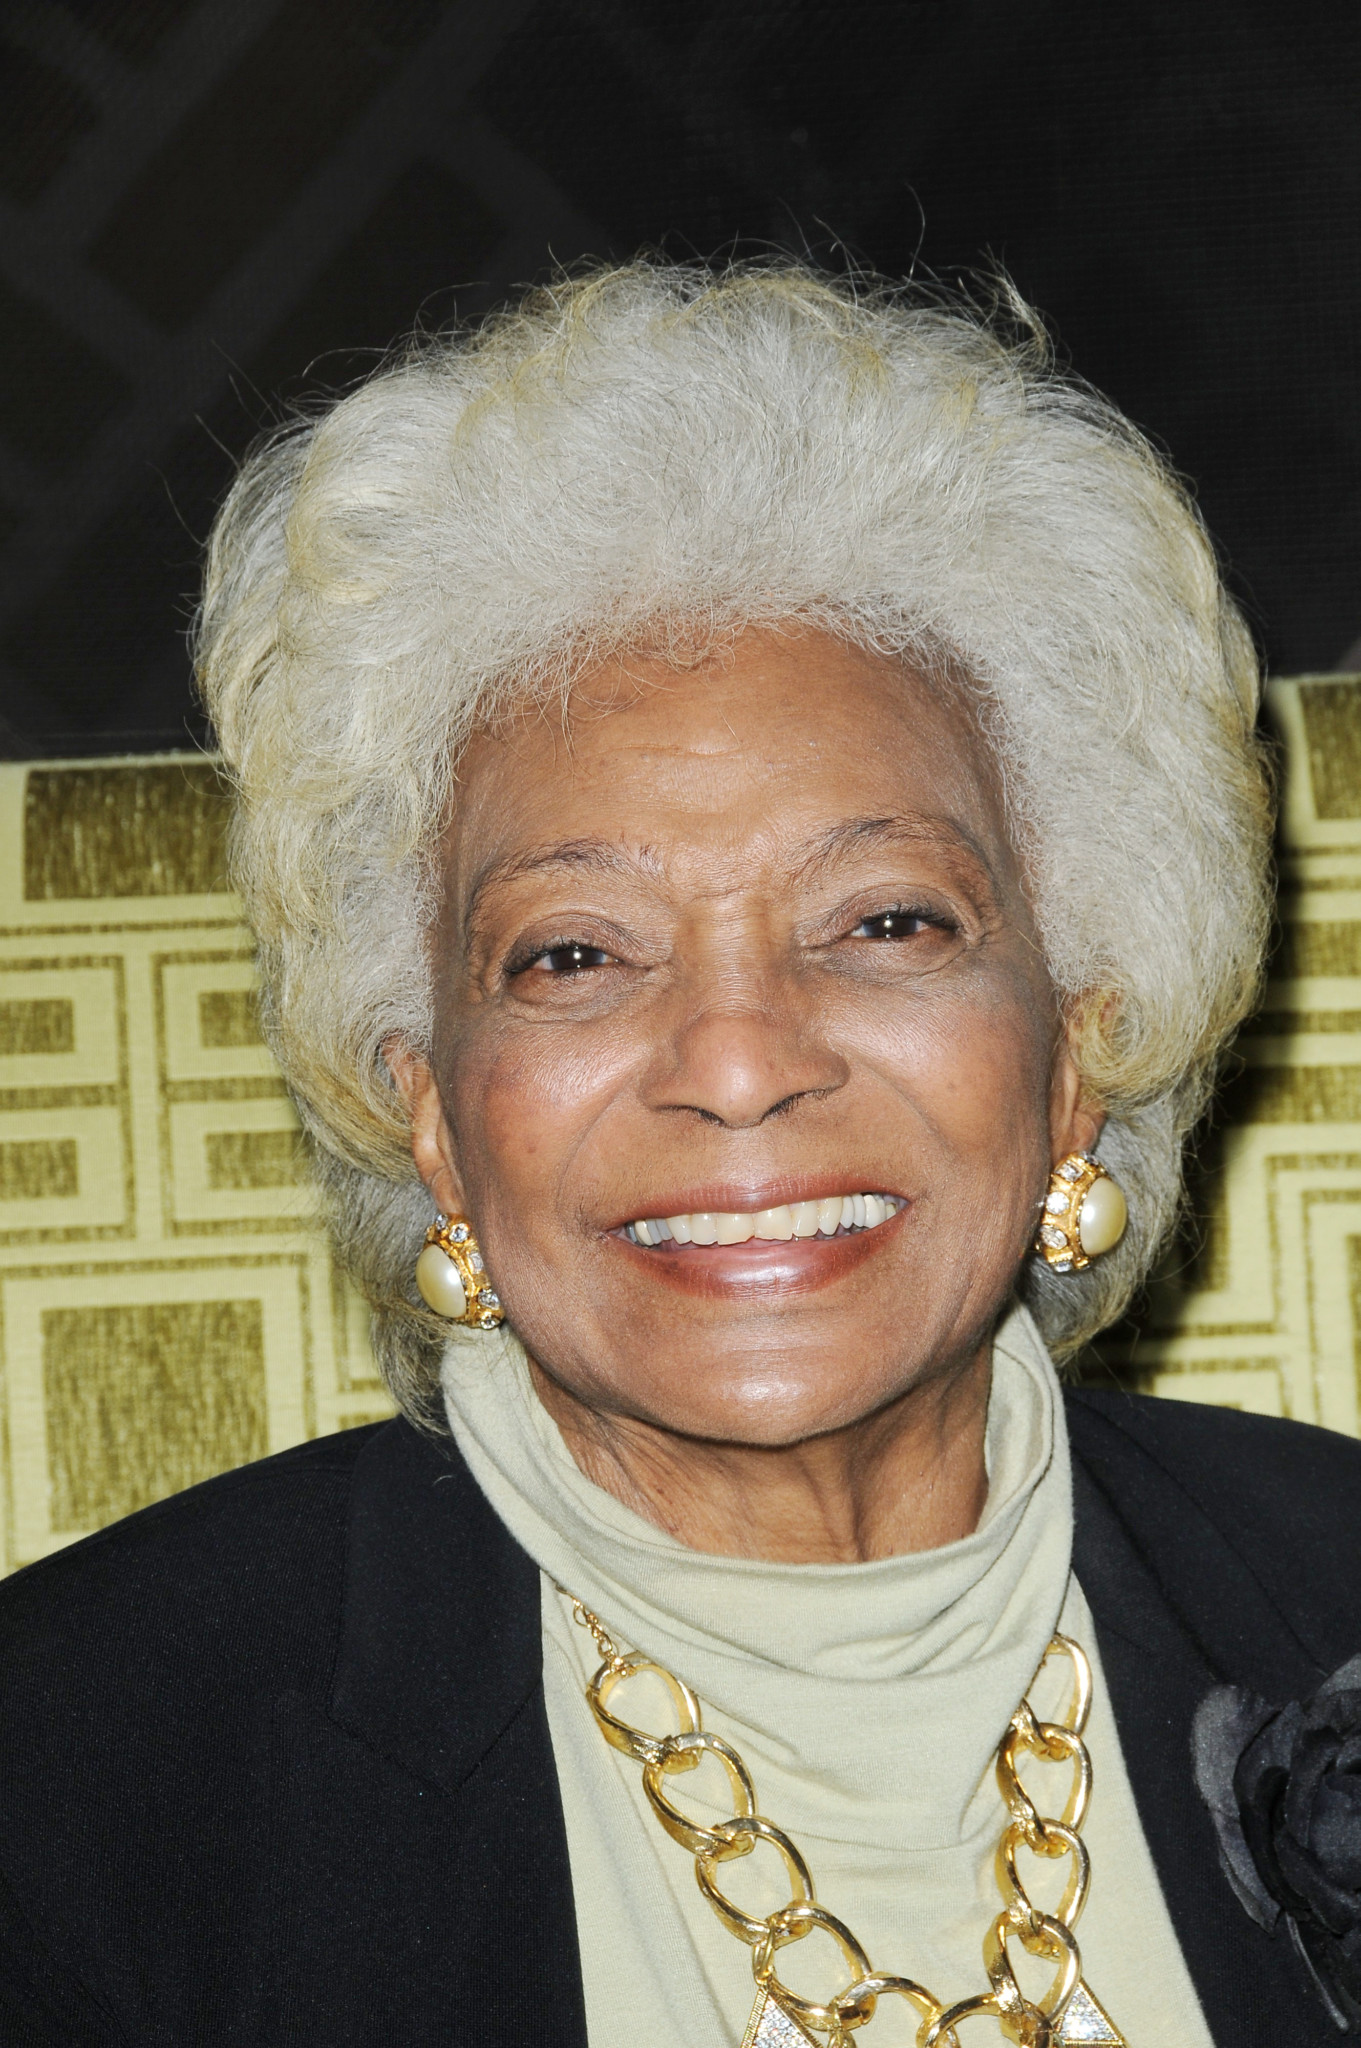 Nichelle Nichols "The Young and the Restless" Set CBS television City Los Angeles 07/27/16 © XJJOHNSON/jpistudios.com 310-657-9661